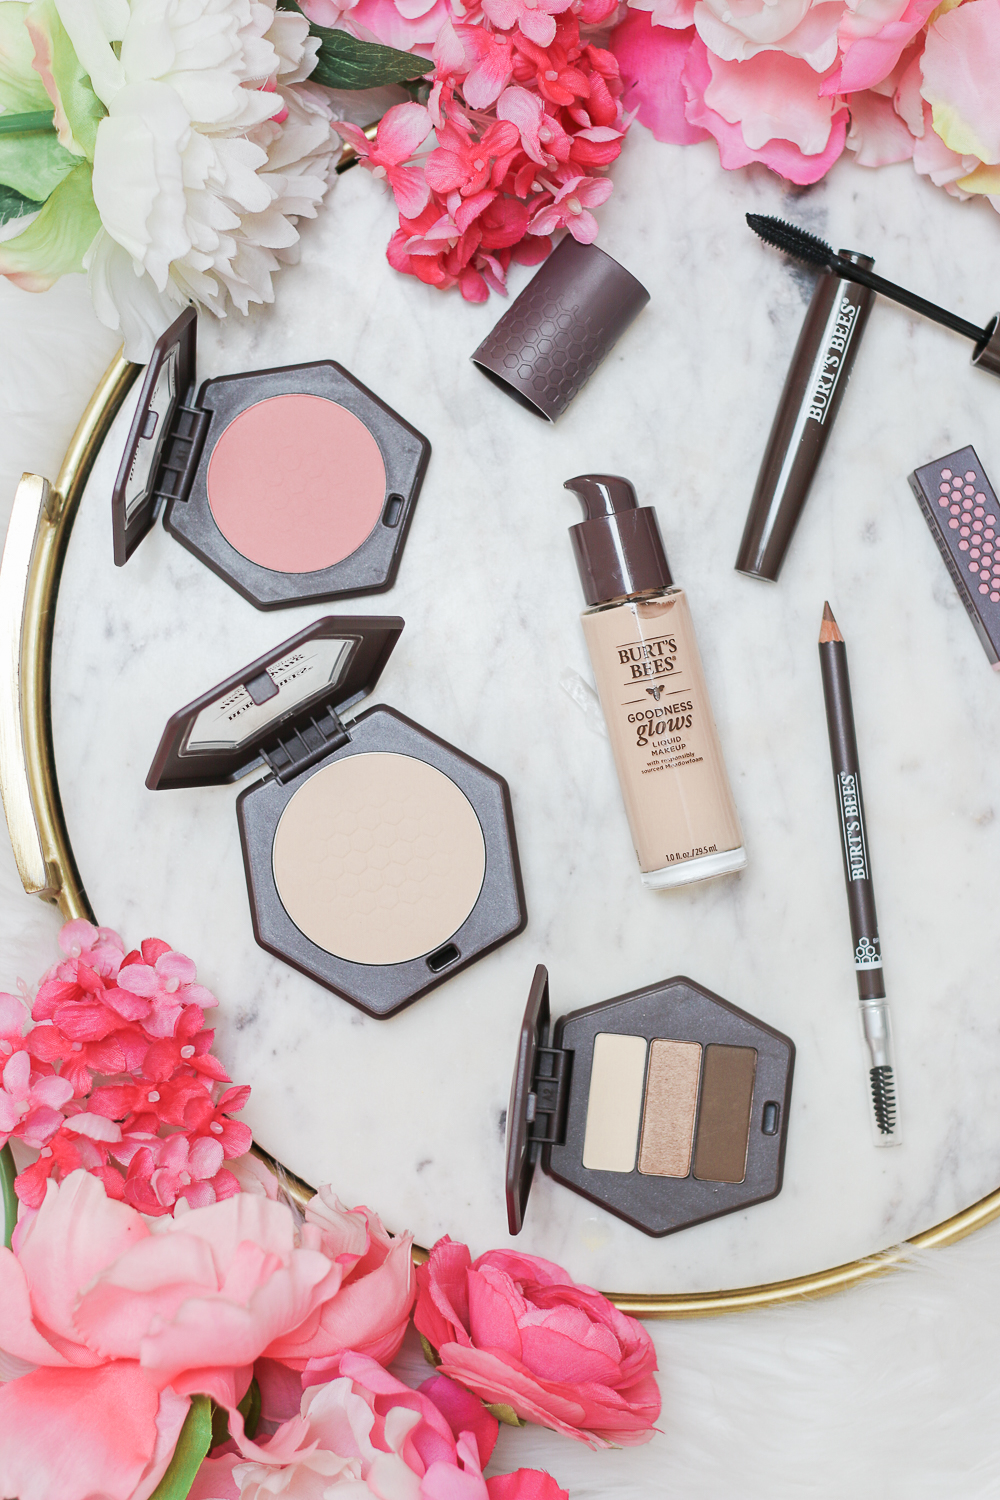 Minimal Makeup Routine, Burt's Bees Minimal Makeup Routine by beauty blogger Stephanie Ziajka from Diary of a Debutante, simple makeup routine for school, cruelty free makeup routine, Burt's Bees makeup